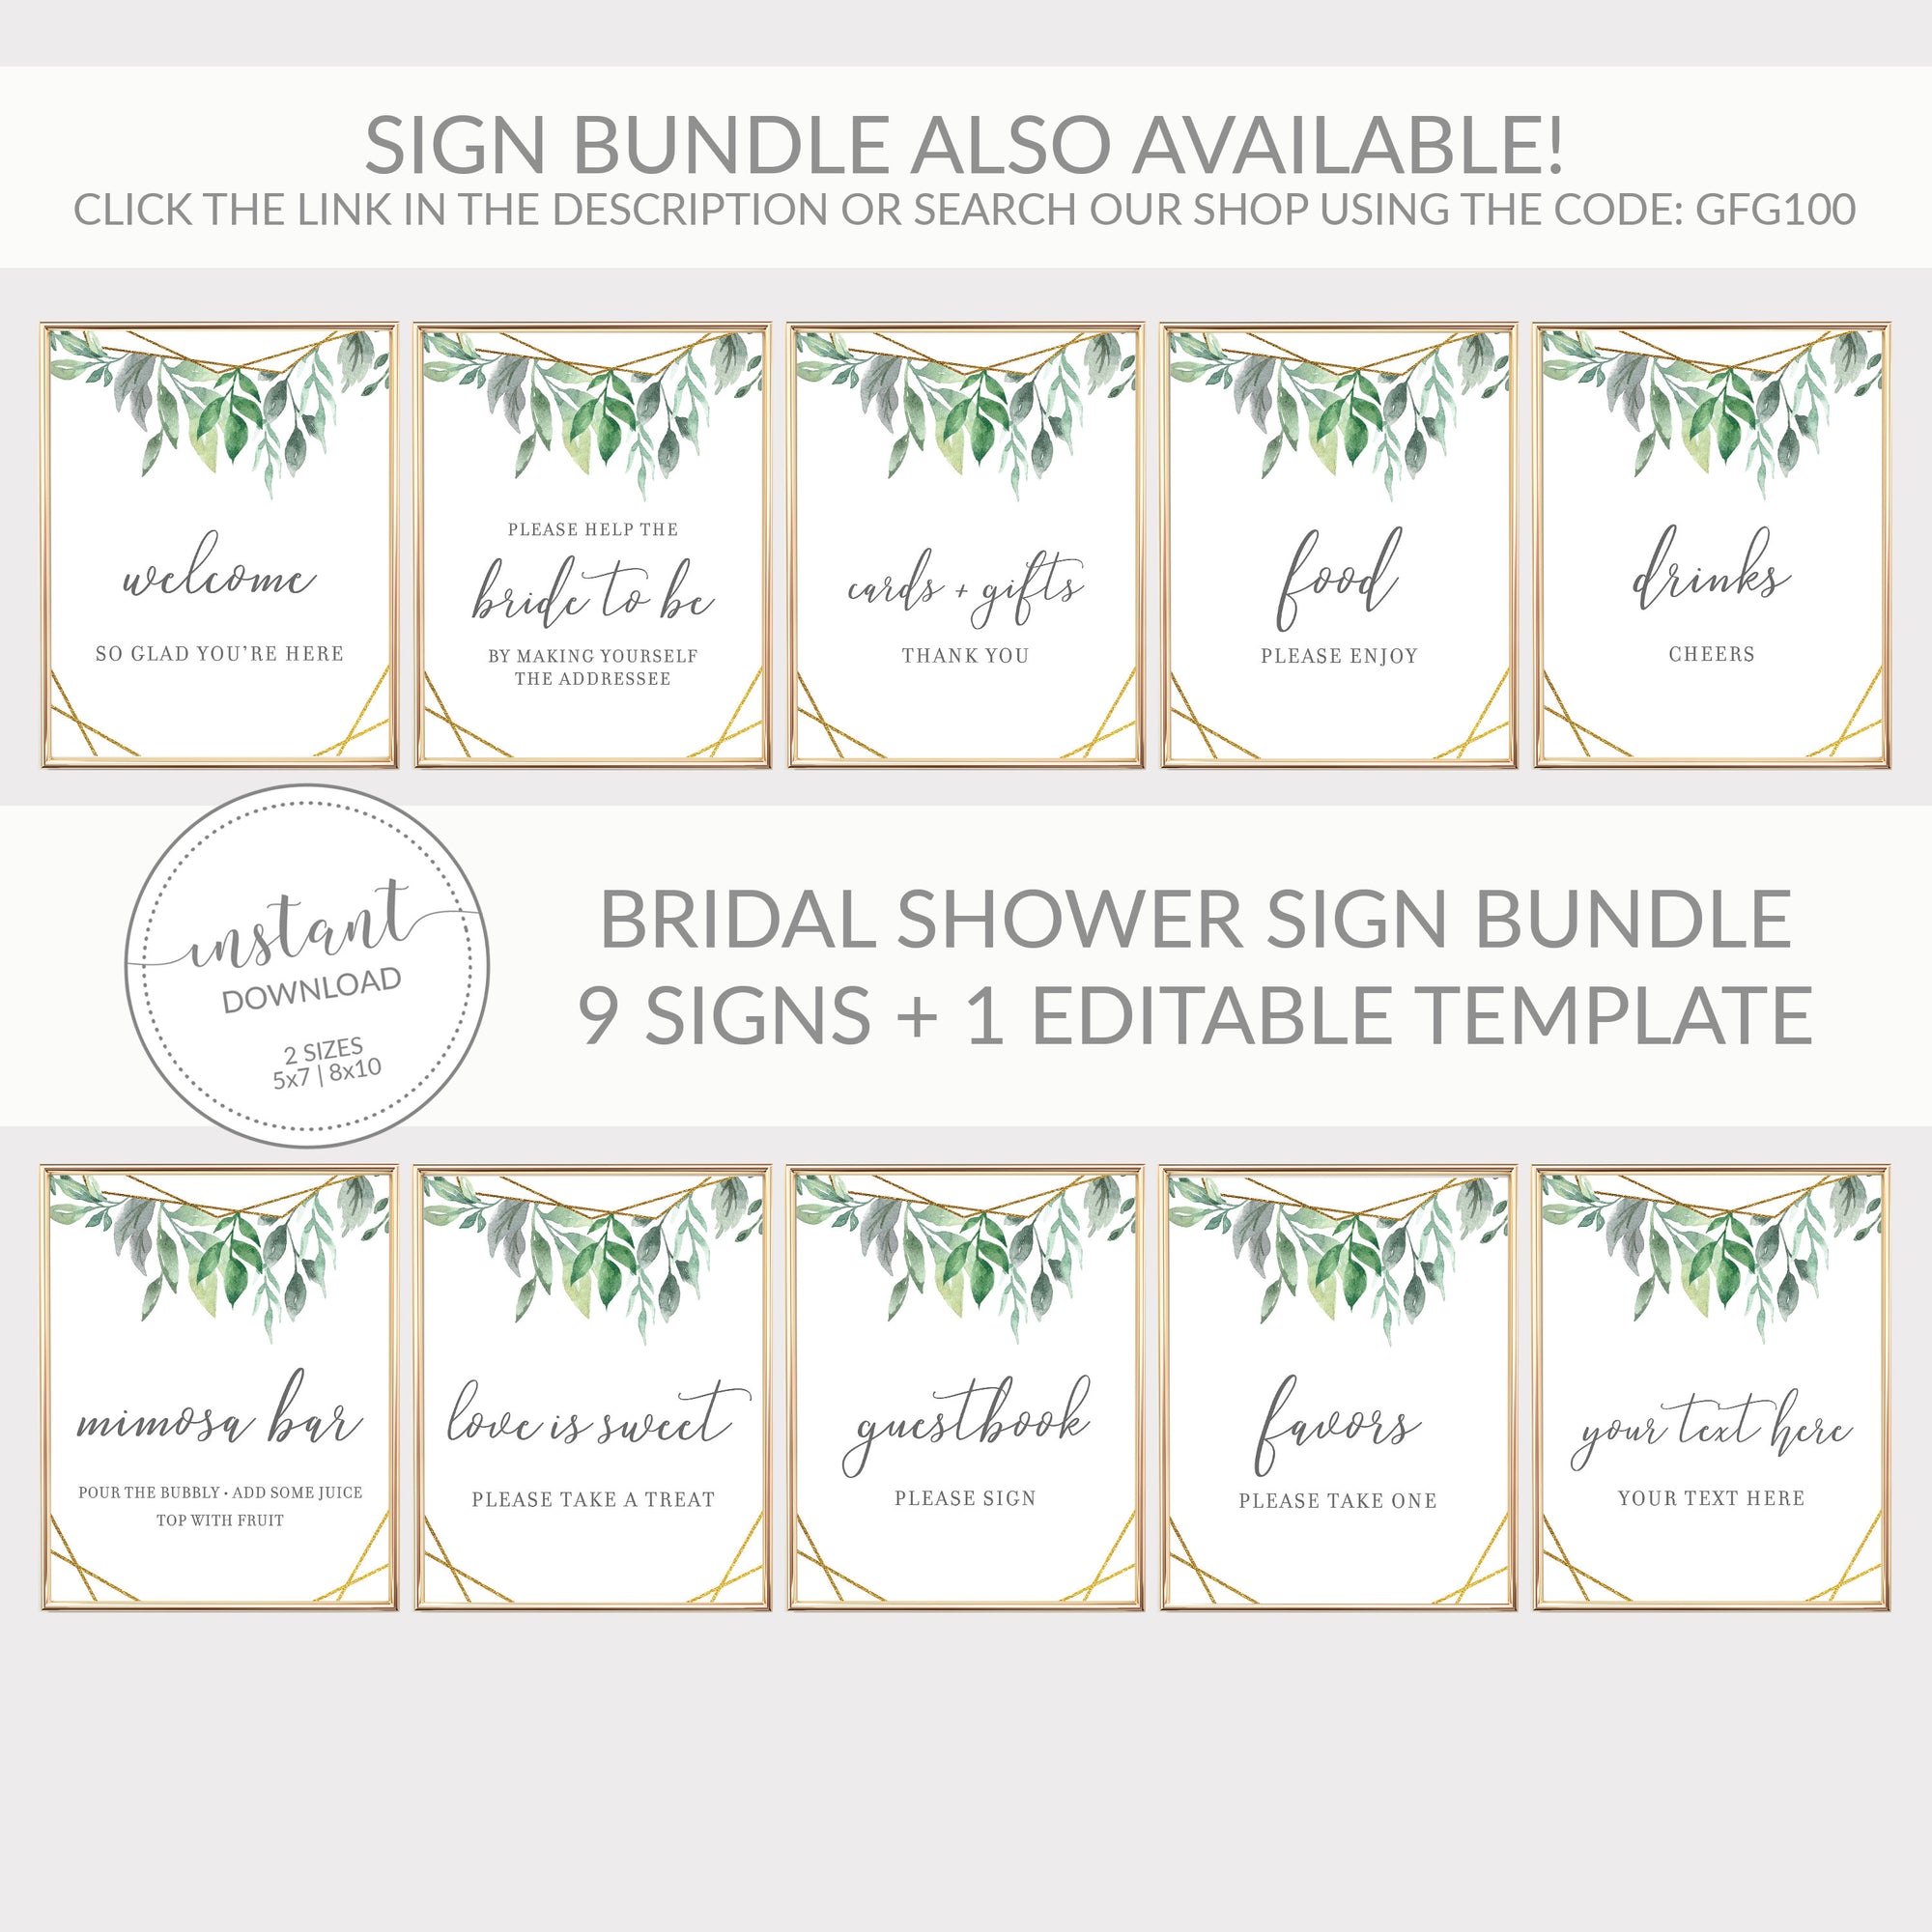 Geometric Gold Greenery Cards and Gifts Printable Sign INSTANT DOWNLOAD, Bridal Shower, Baby Shower, Wedding Decorations Supplies - GFG100 - @PlumPolkaDot 